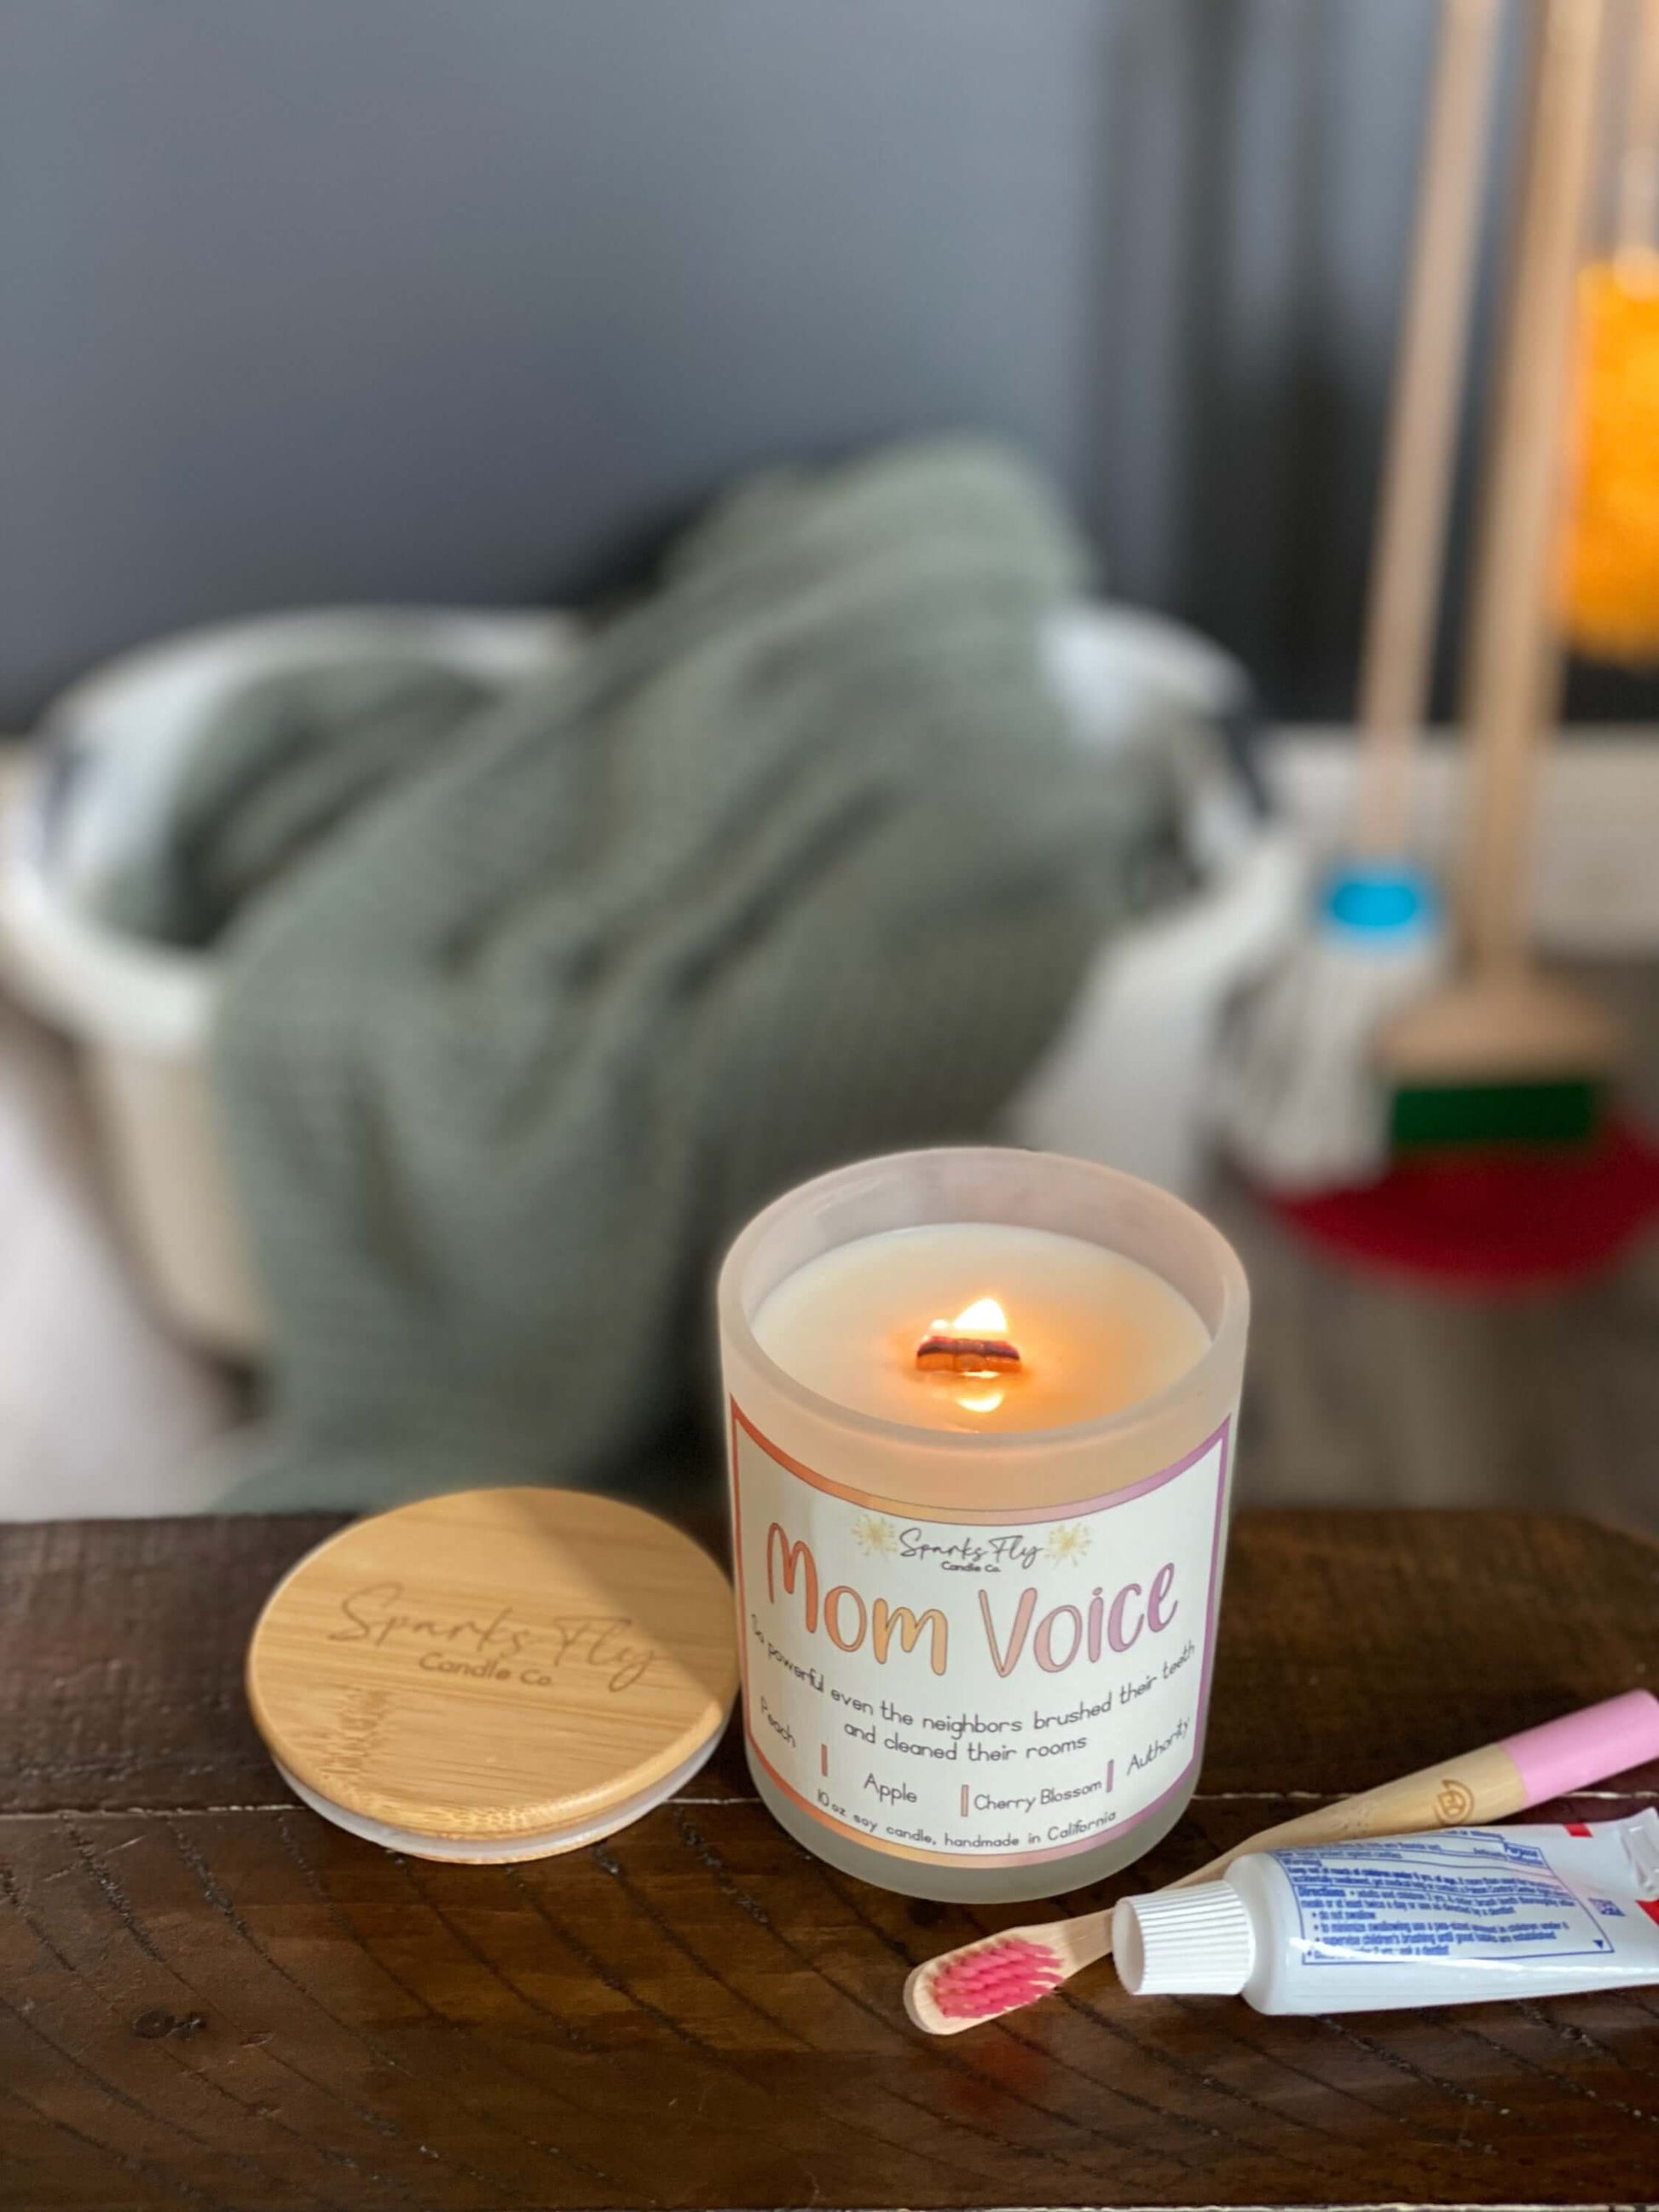 Mom Voice Candle - The scent of unmatched authority that even the neighbors heed